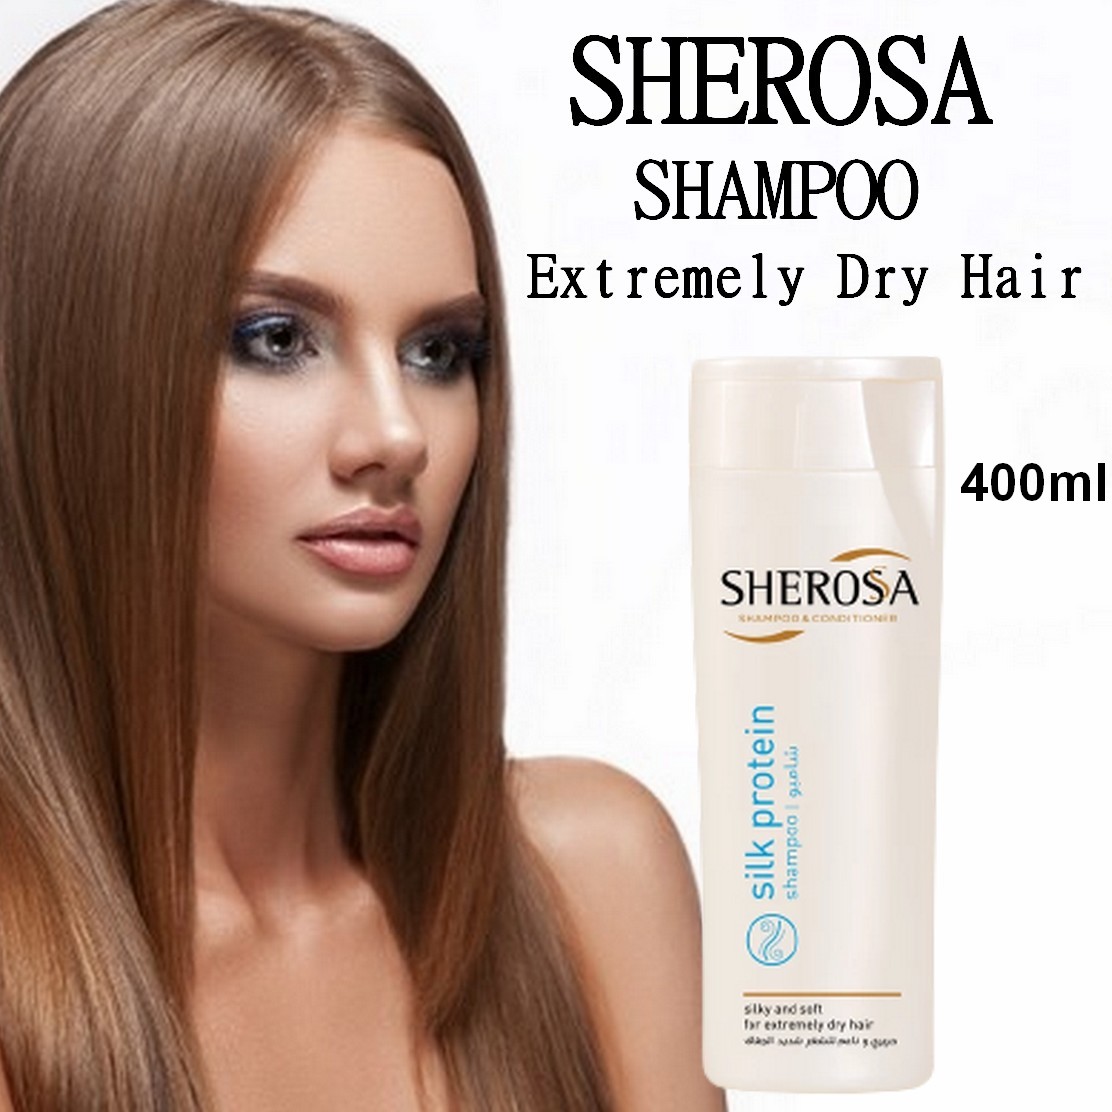 SHEROSSA Silk Protein Shampoo & Conditioner For Extremely Dry Hair 400ml